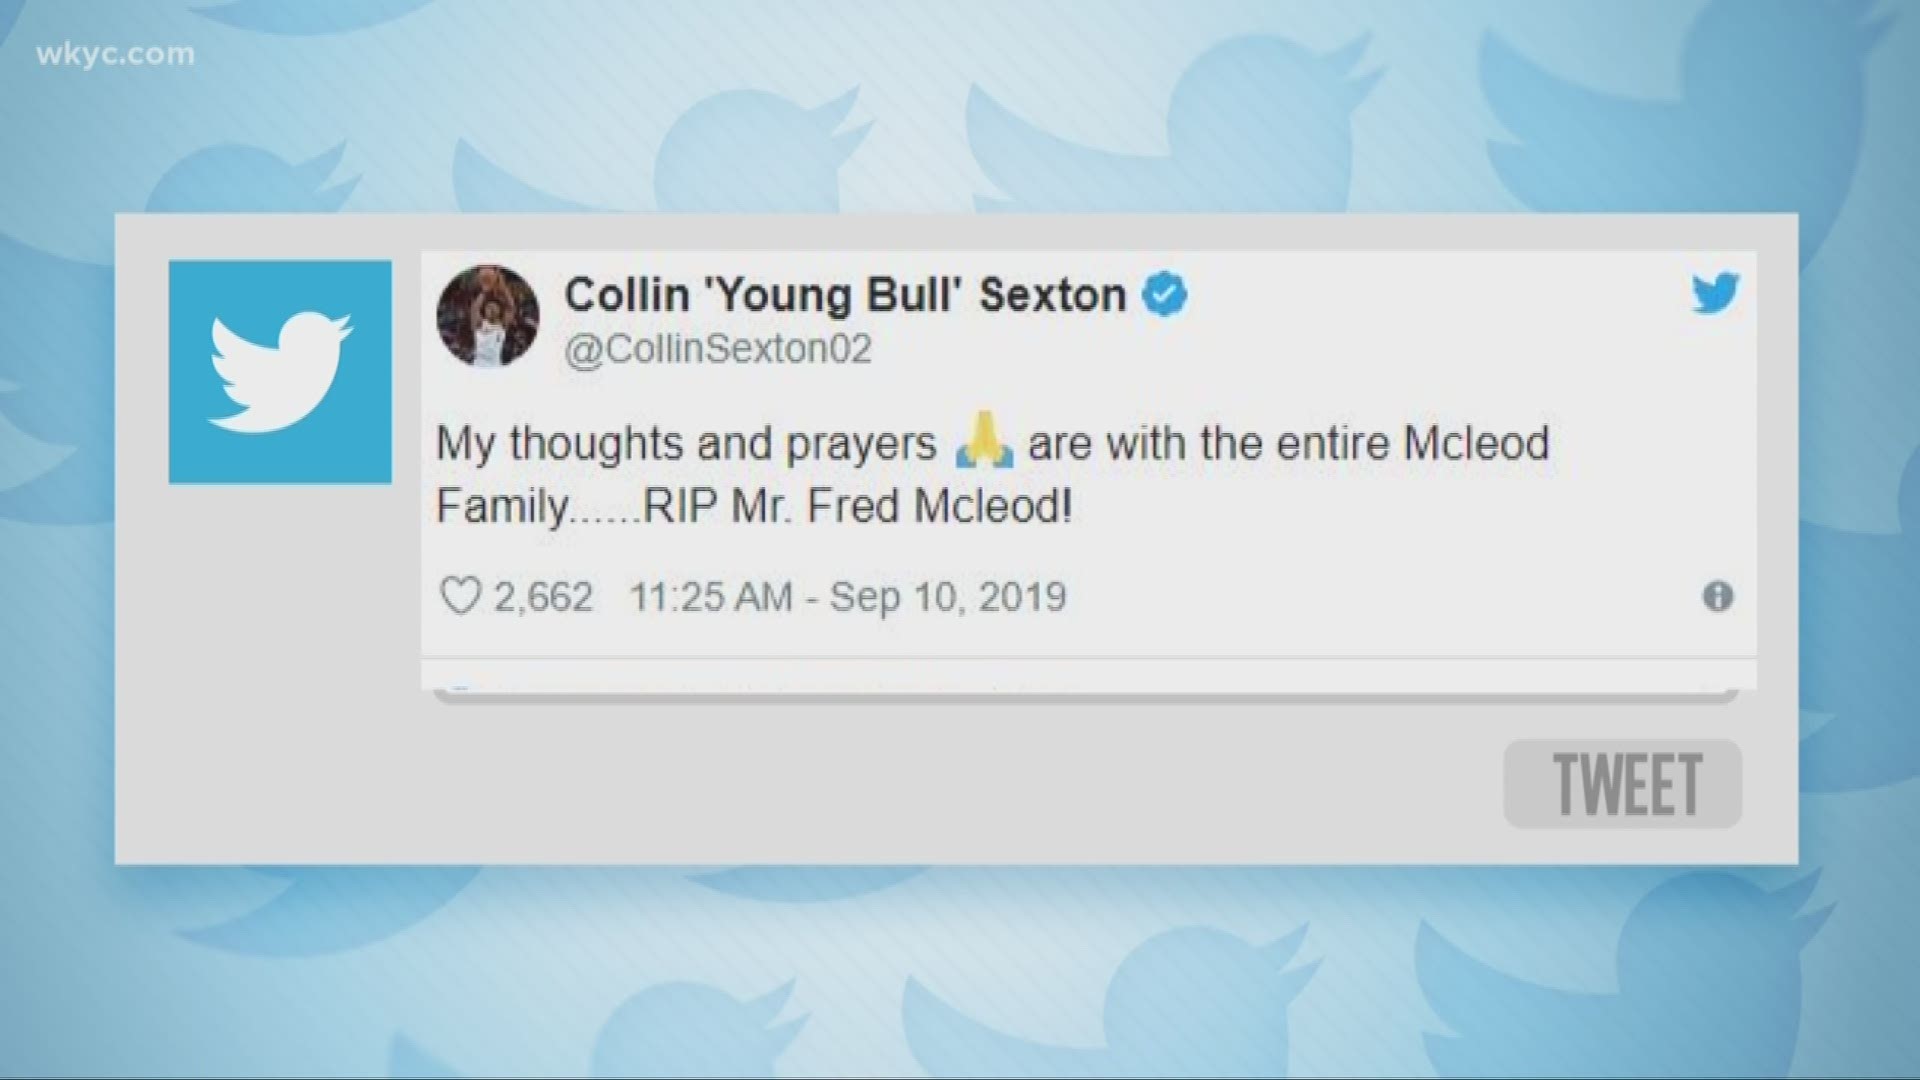 McLeod, 67, died suddenly on Monday evening, ahead of what would have been his 14th consecutive season as Cavaliers television play-by-play announcer. Immediately after the news of his passing, those close to McLeod and the community he built covering the Cavs began to honor his memory on social media, with heartfelt posts expressing their sadness and sympathy to his family.